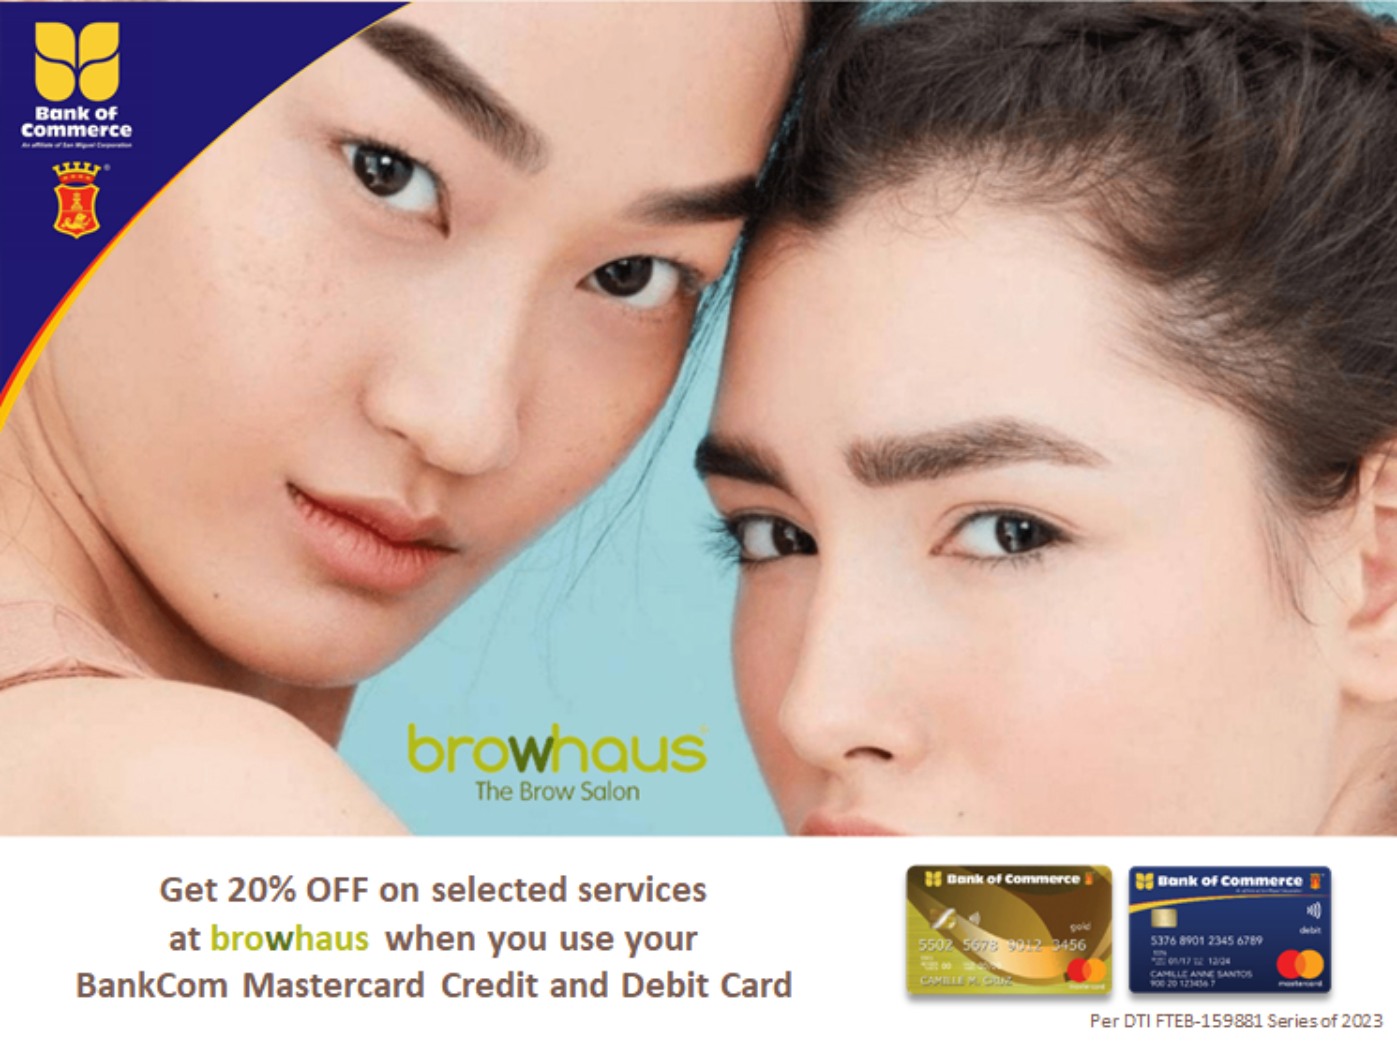 bank of commerce credit card promo 2023 - 20% discount browhaus